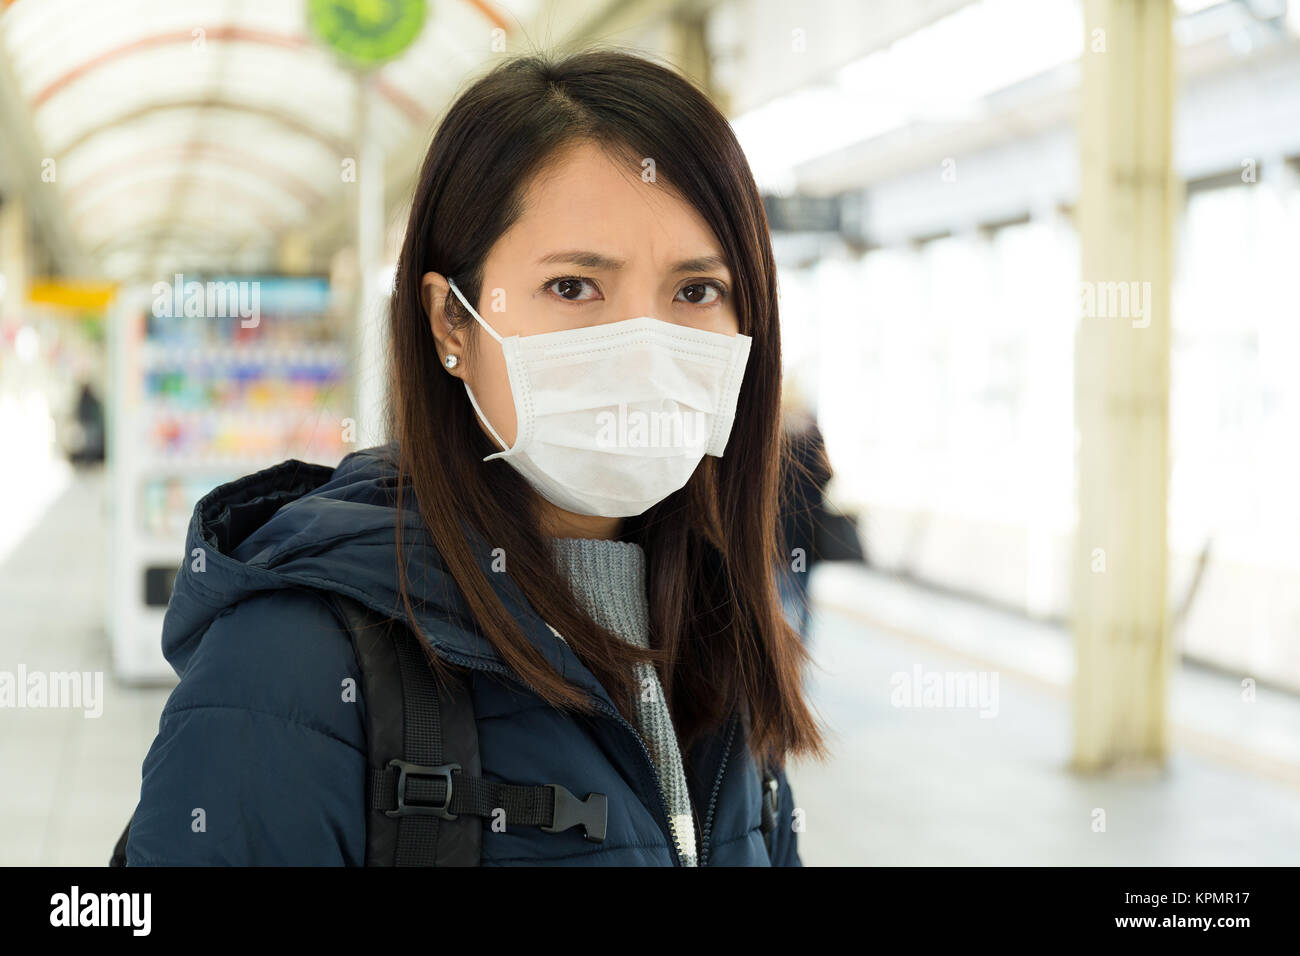 Woman wearing face mask for protection Stock Photo - Alamy